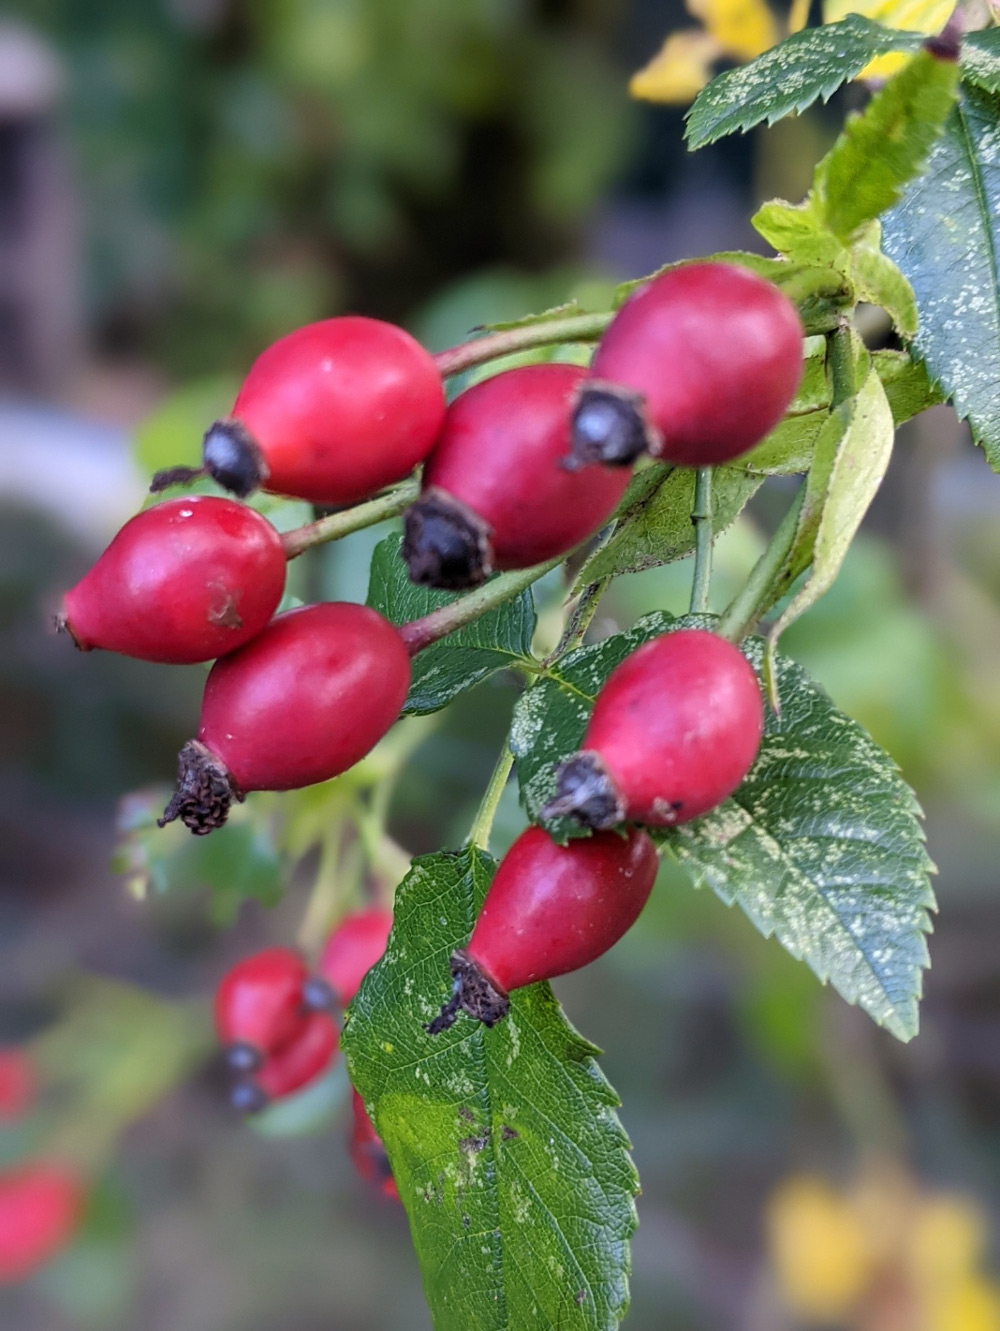 Rosehip is known for its high vitamin C and anti-inflammatory properties